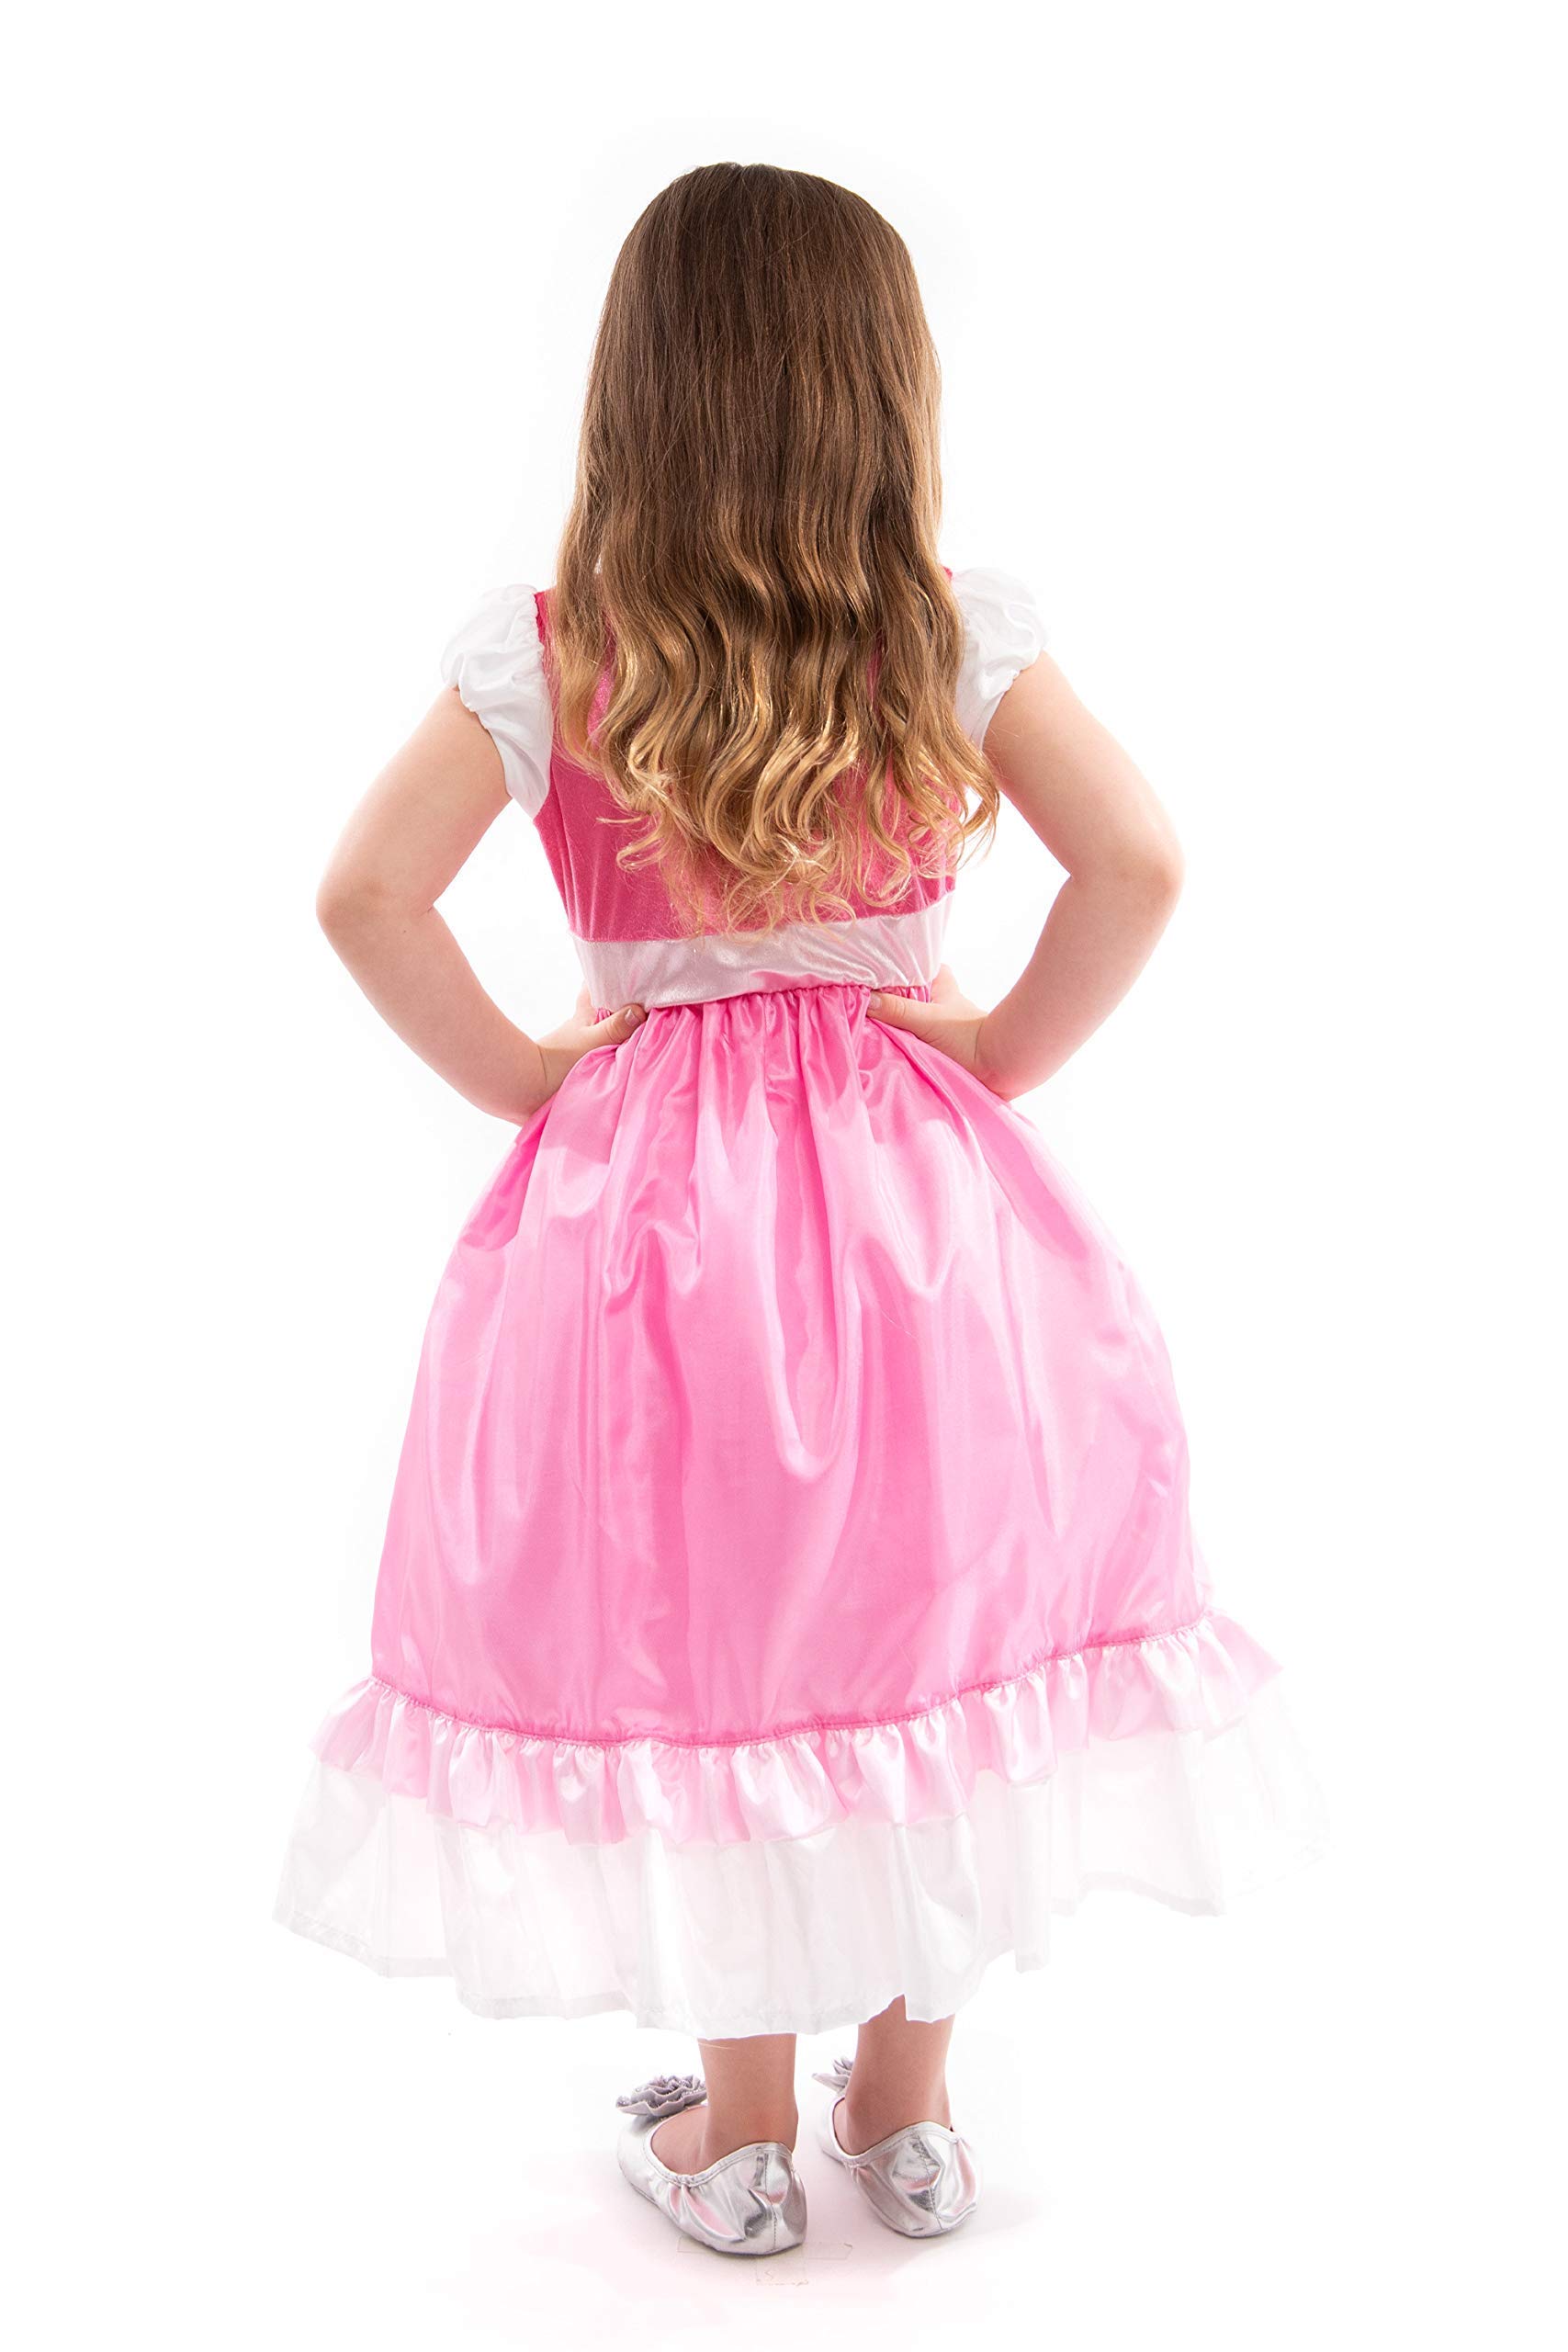 Little Adventures Cinderella Pink Ball Gown Dress up Costume (Large Age 5-7) with Matching Doll Dress - Machine Washable Child Pretend Play and Party Dress with No Glitter